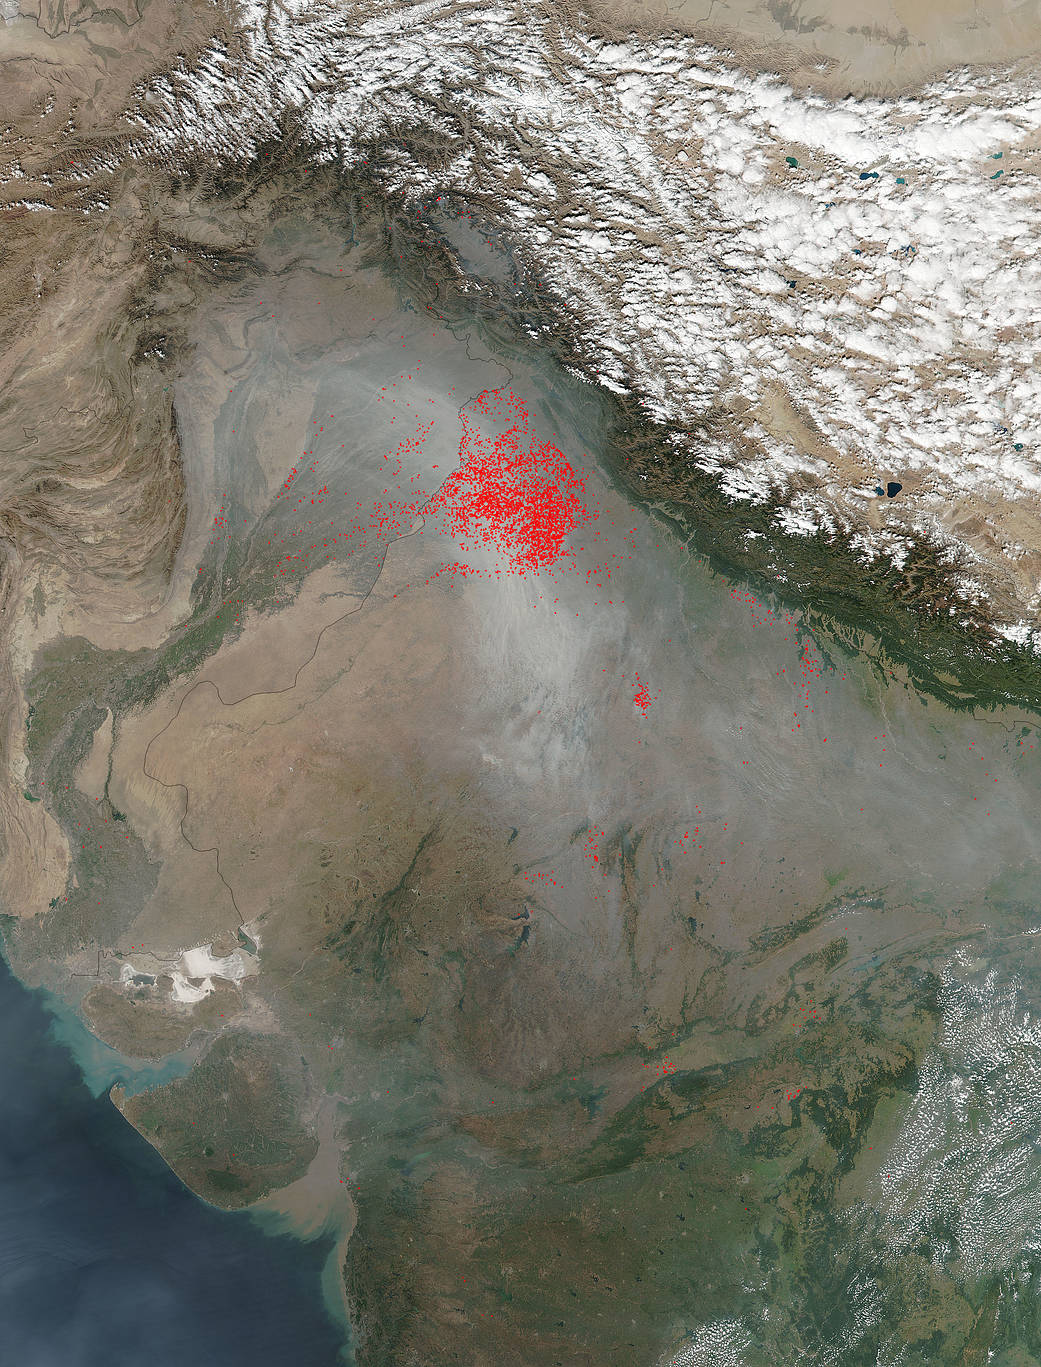 Agricultural fires in India